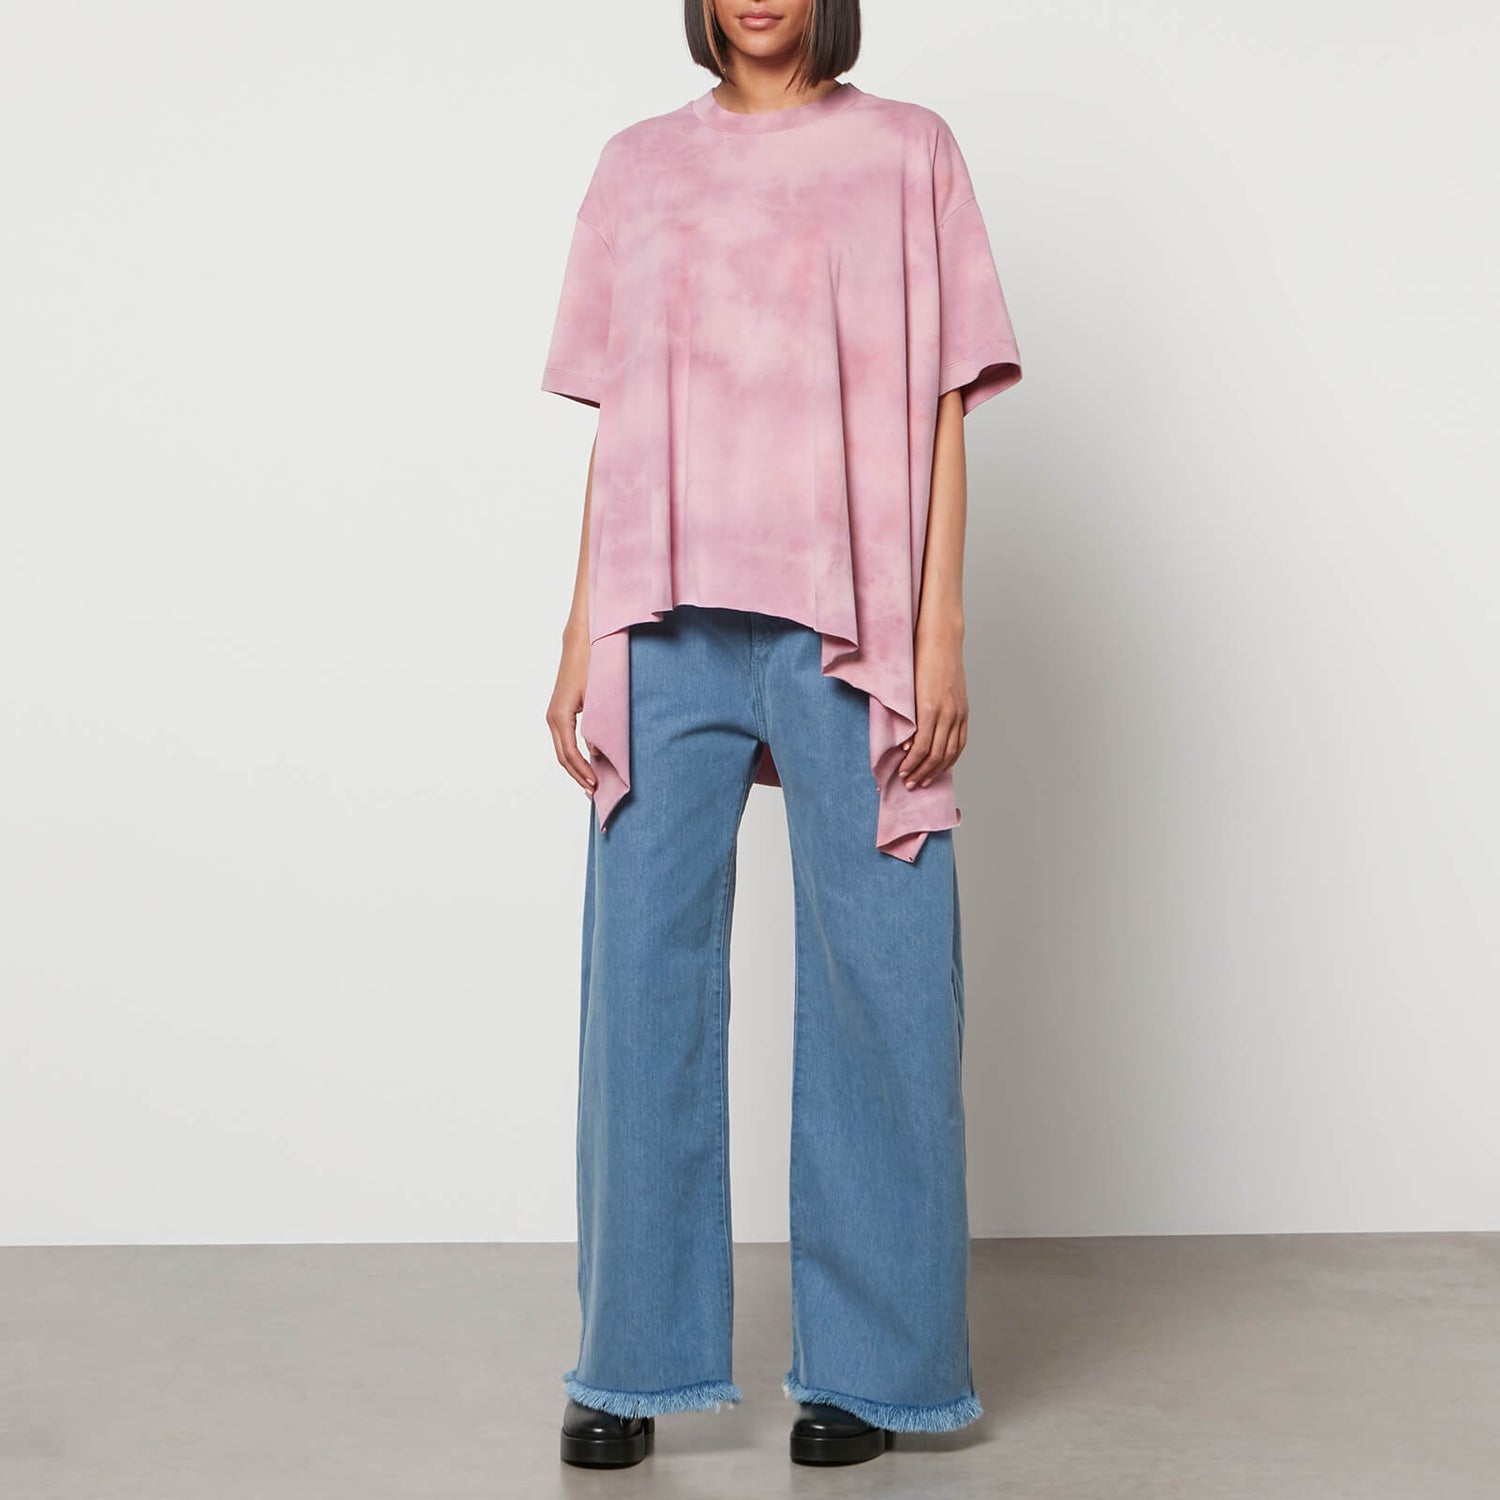 Marques Almeida Women's Natural Dye T-Shirt With Side Flaps - Pink Tie Dye - XS